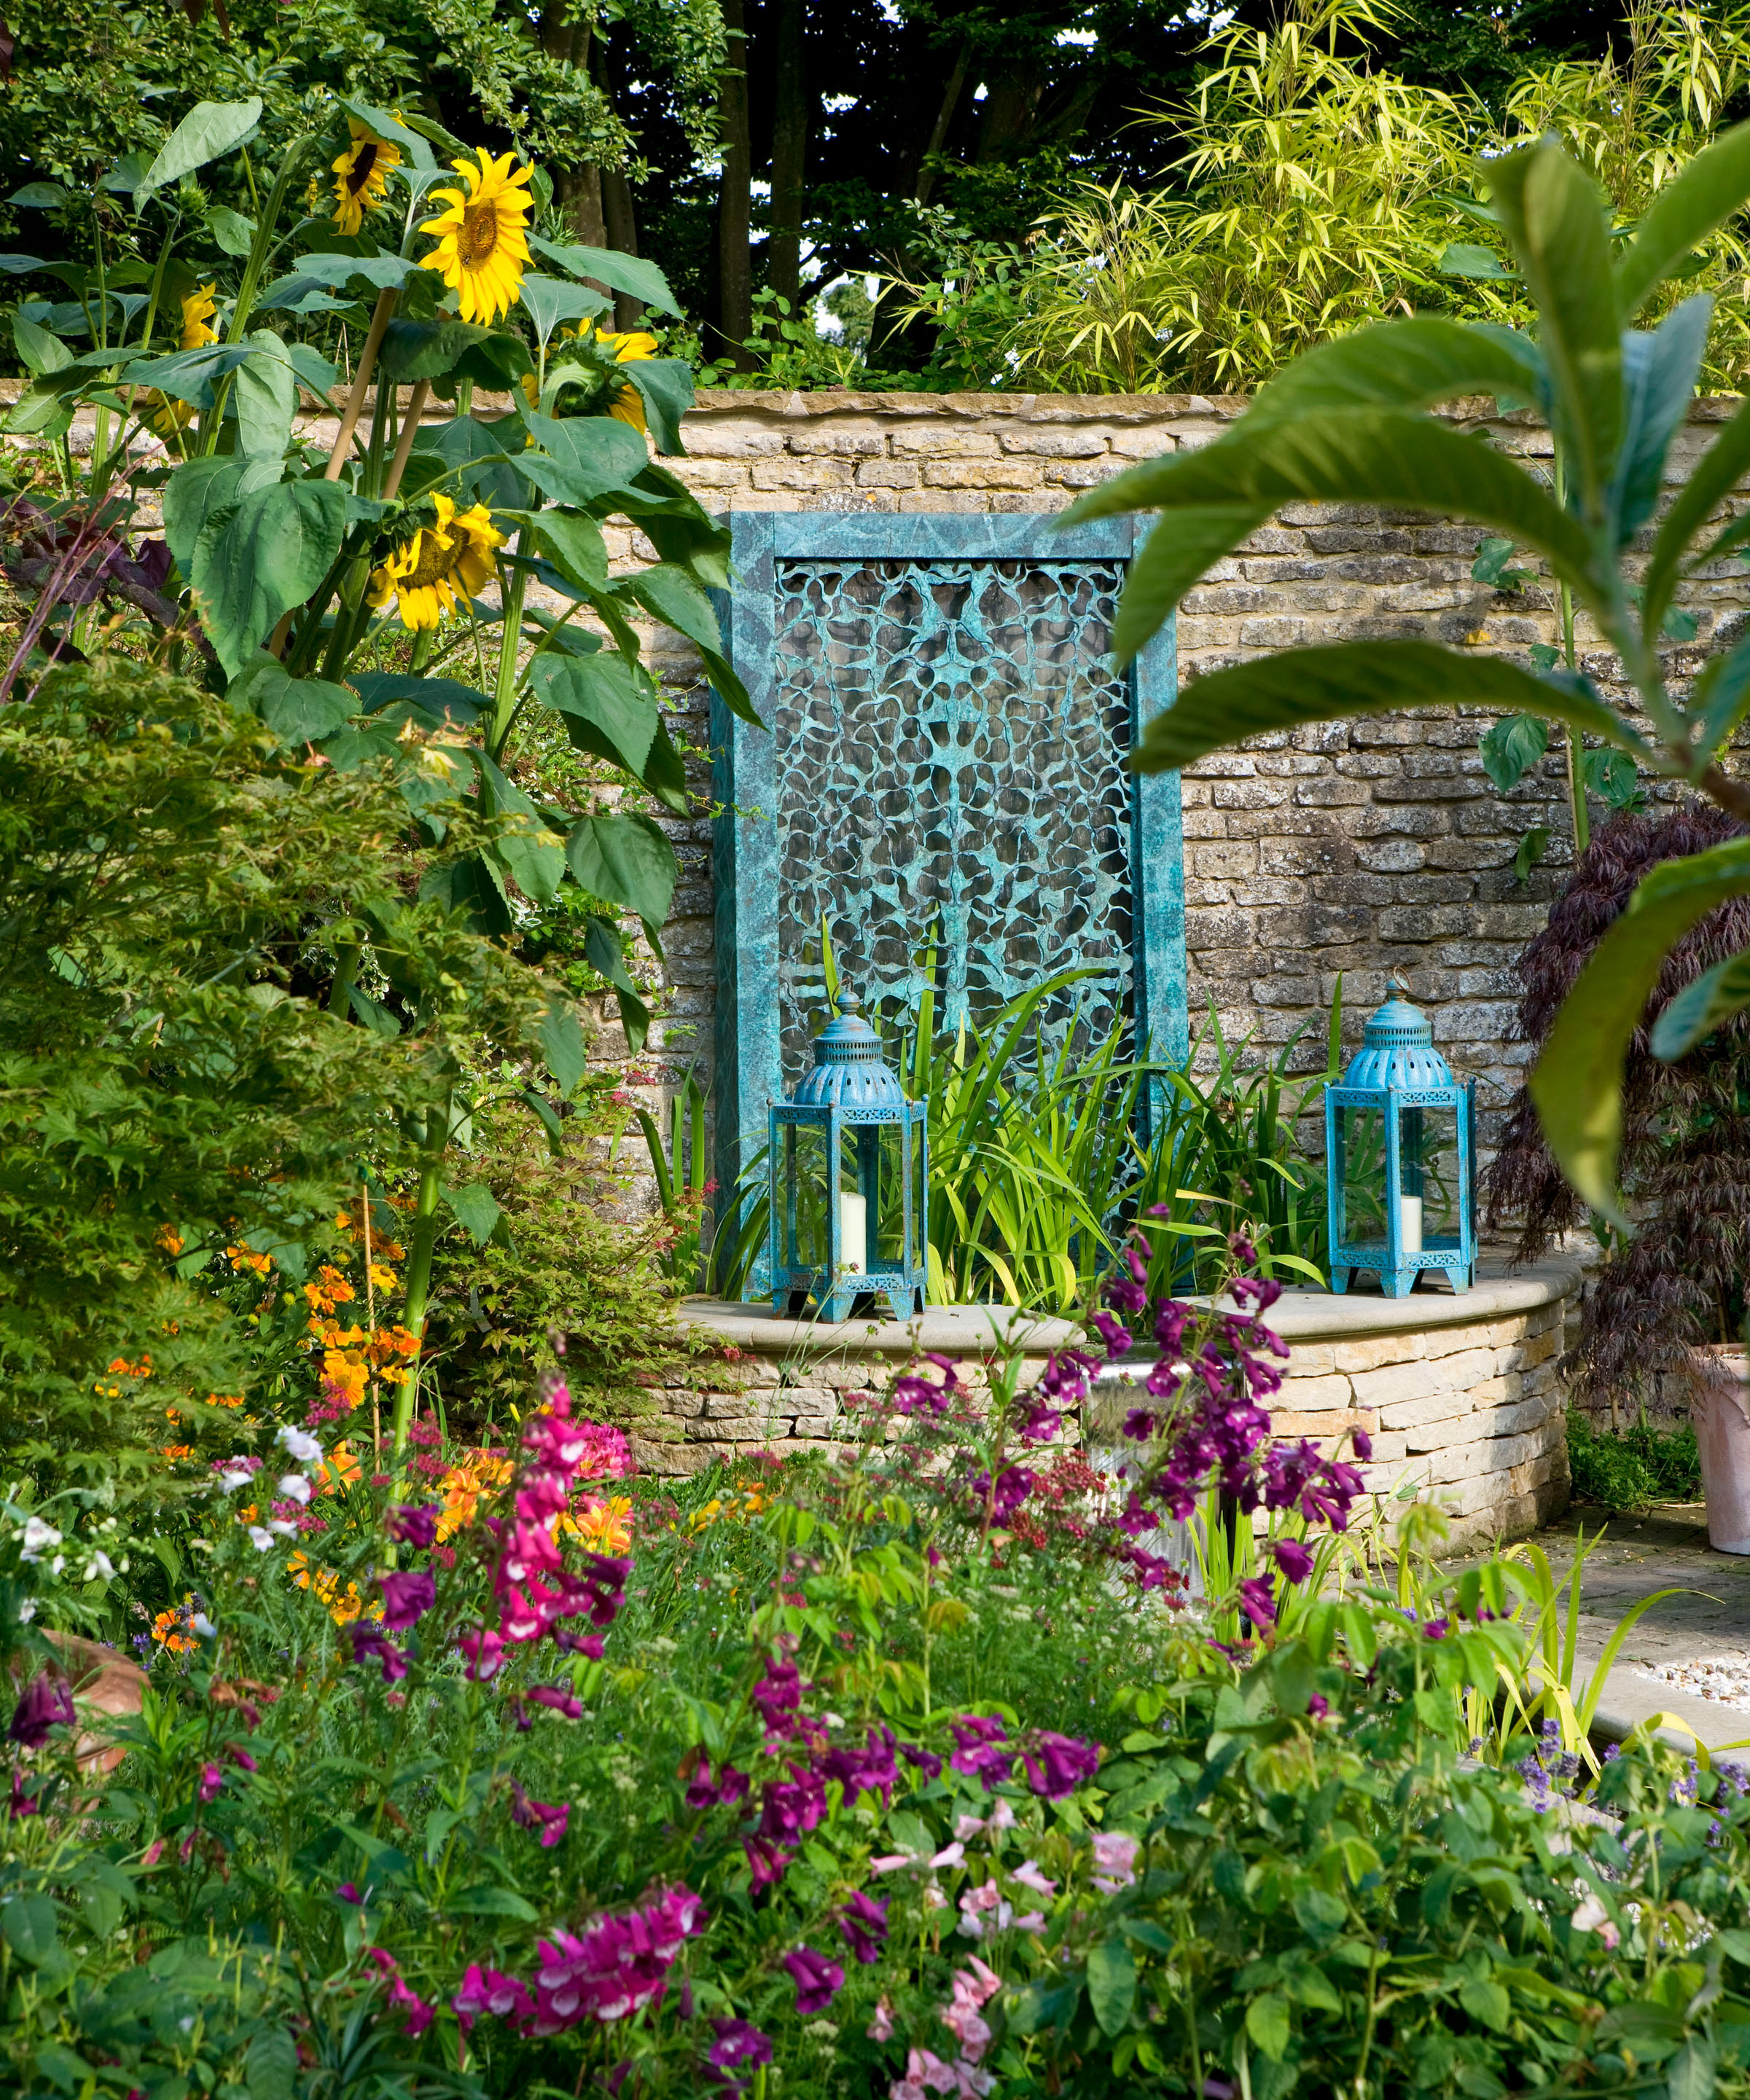 filigree bronze water wall by David Harber in a country garden